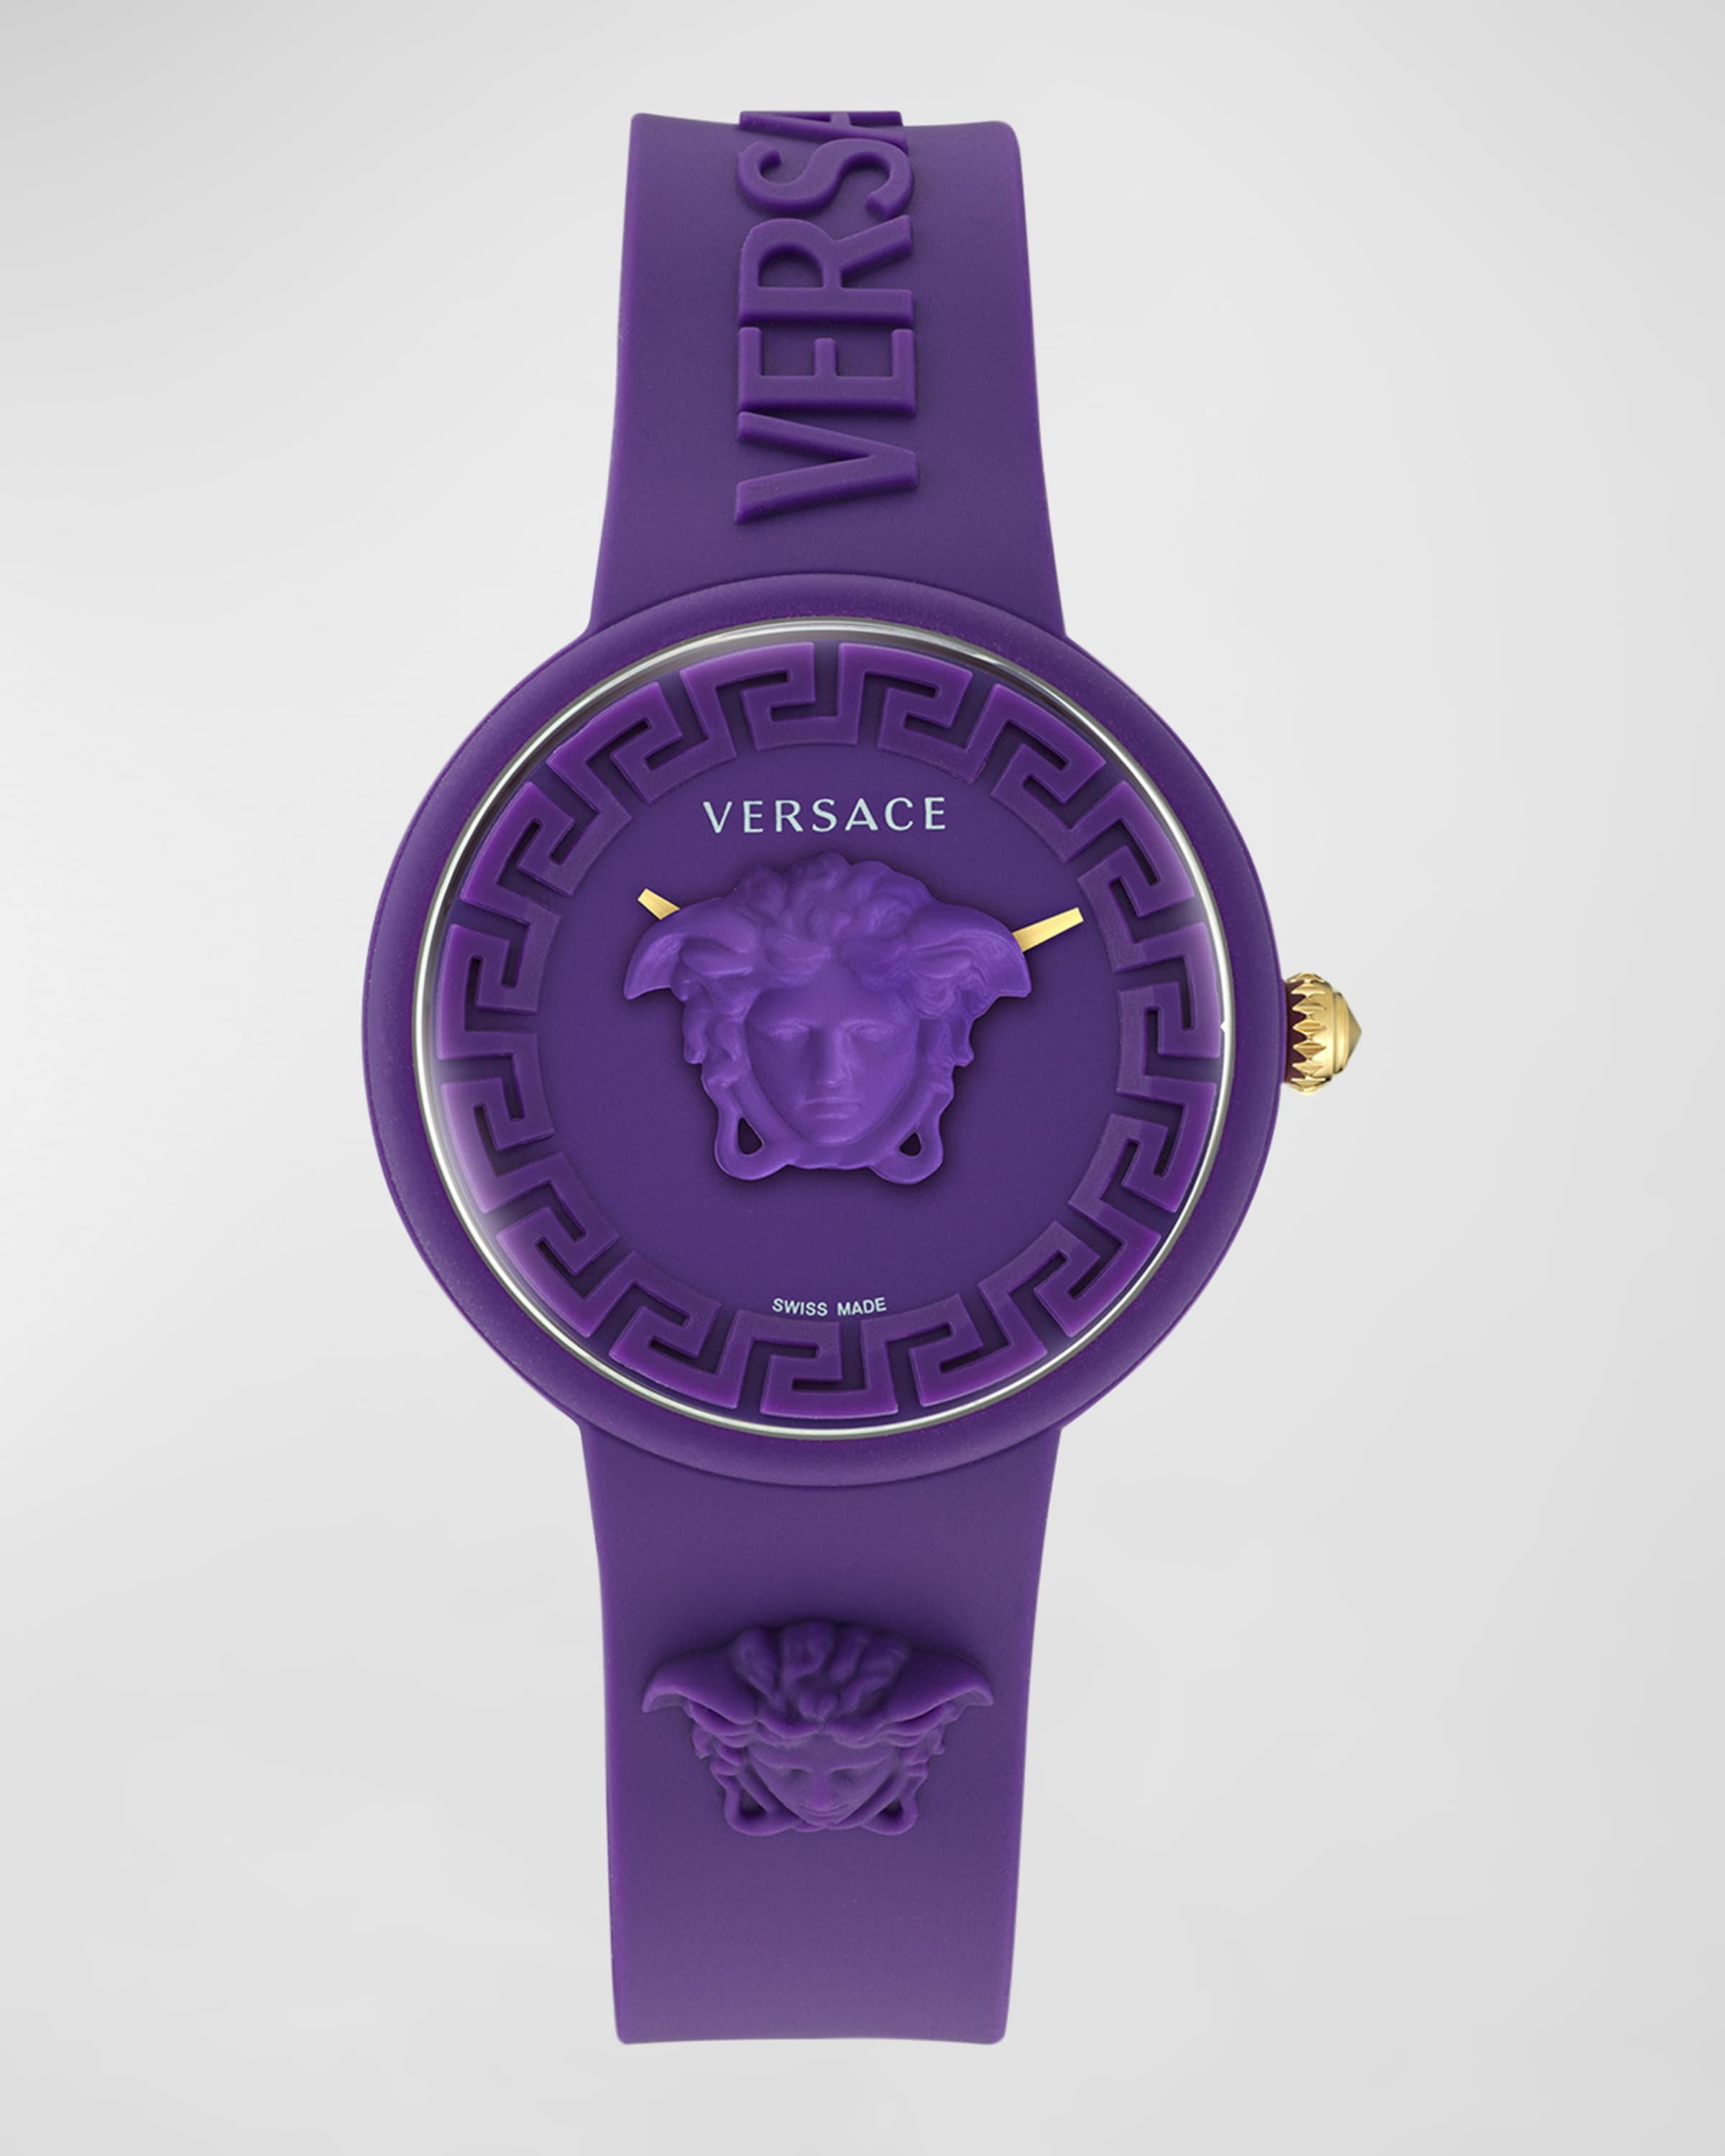 39mm Medusa Pop Watch with Silicone Strap and Matching Case, Purple - 1